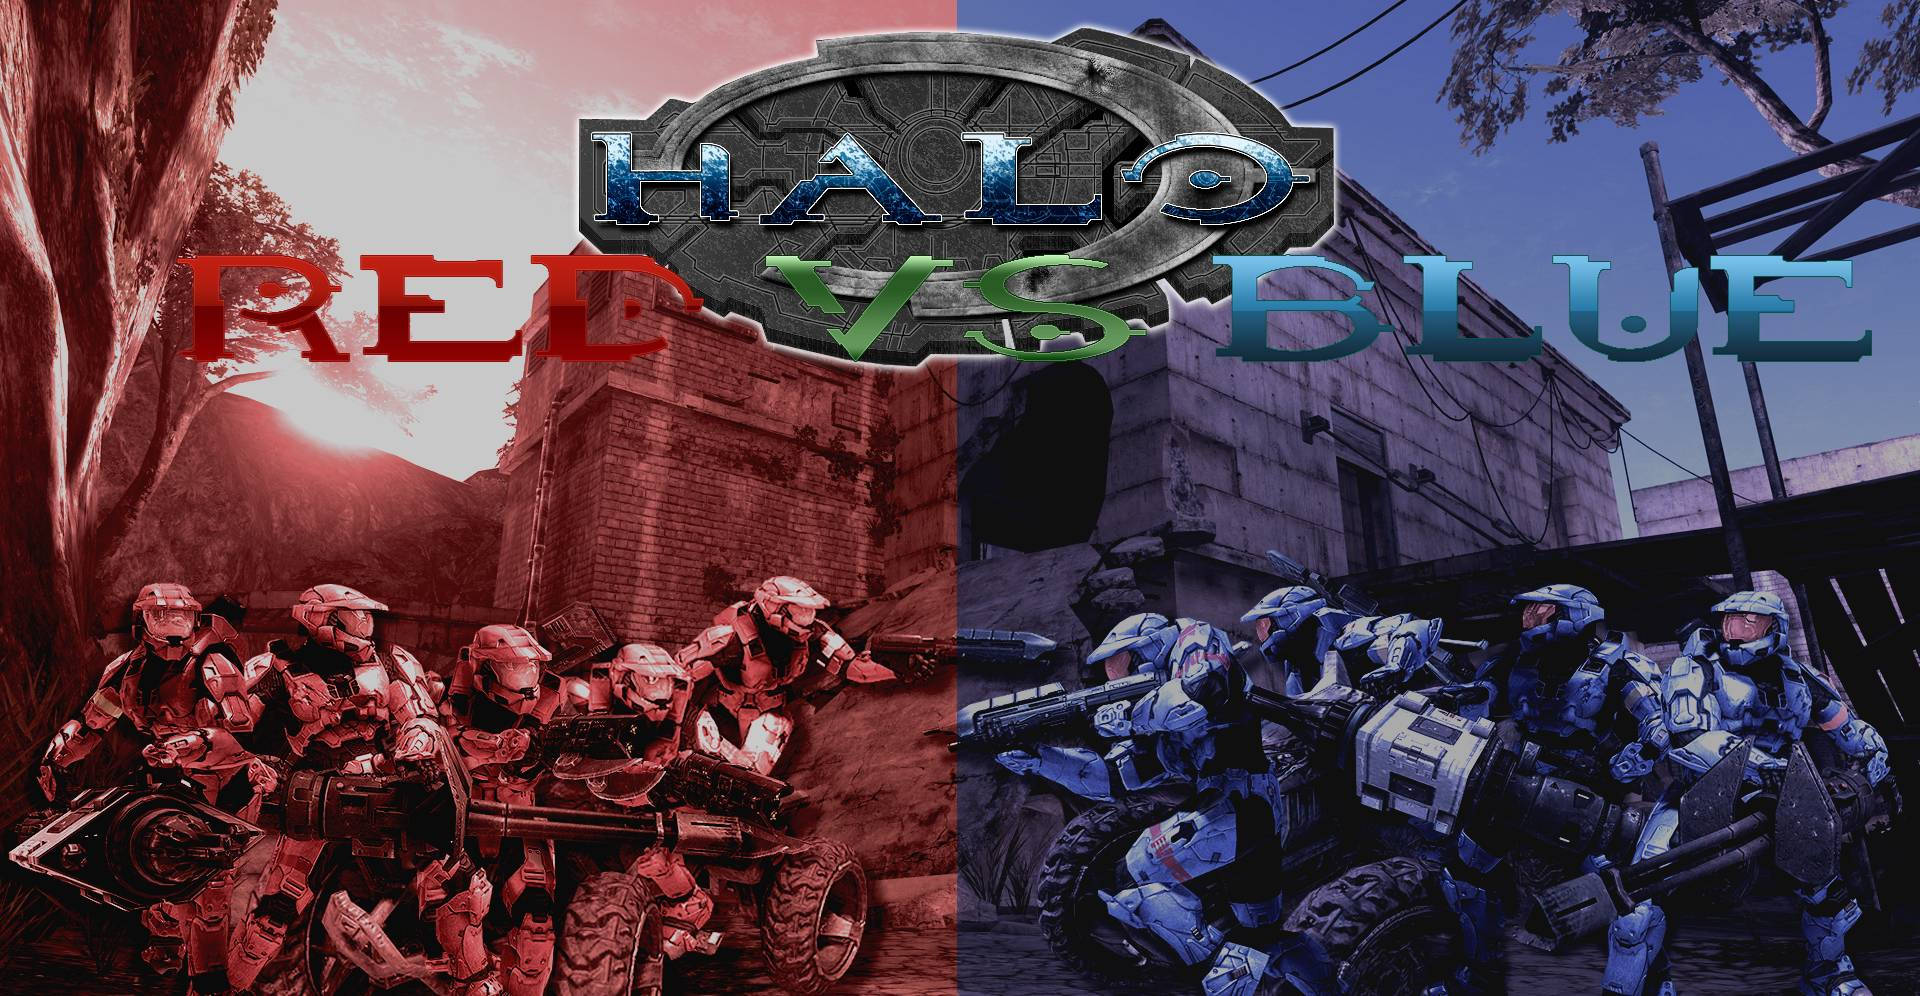 Red Vs Blue Based On Halo Game Background